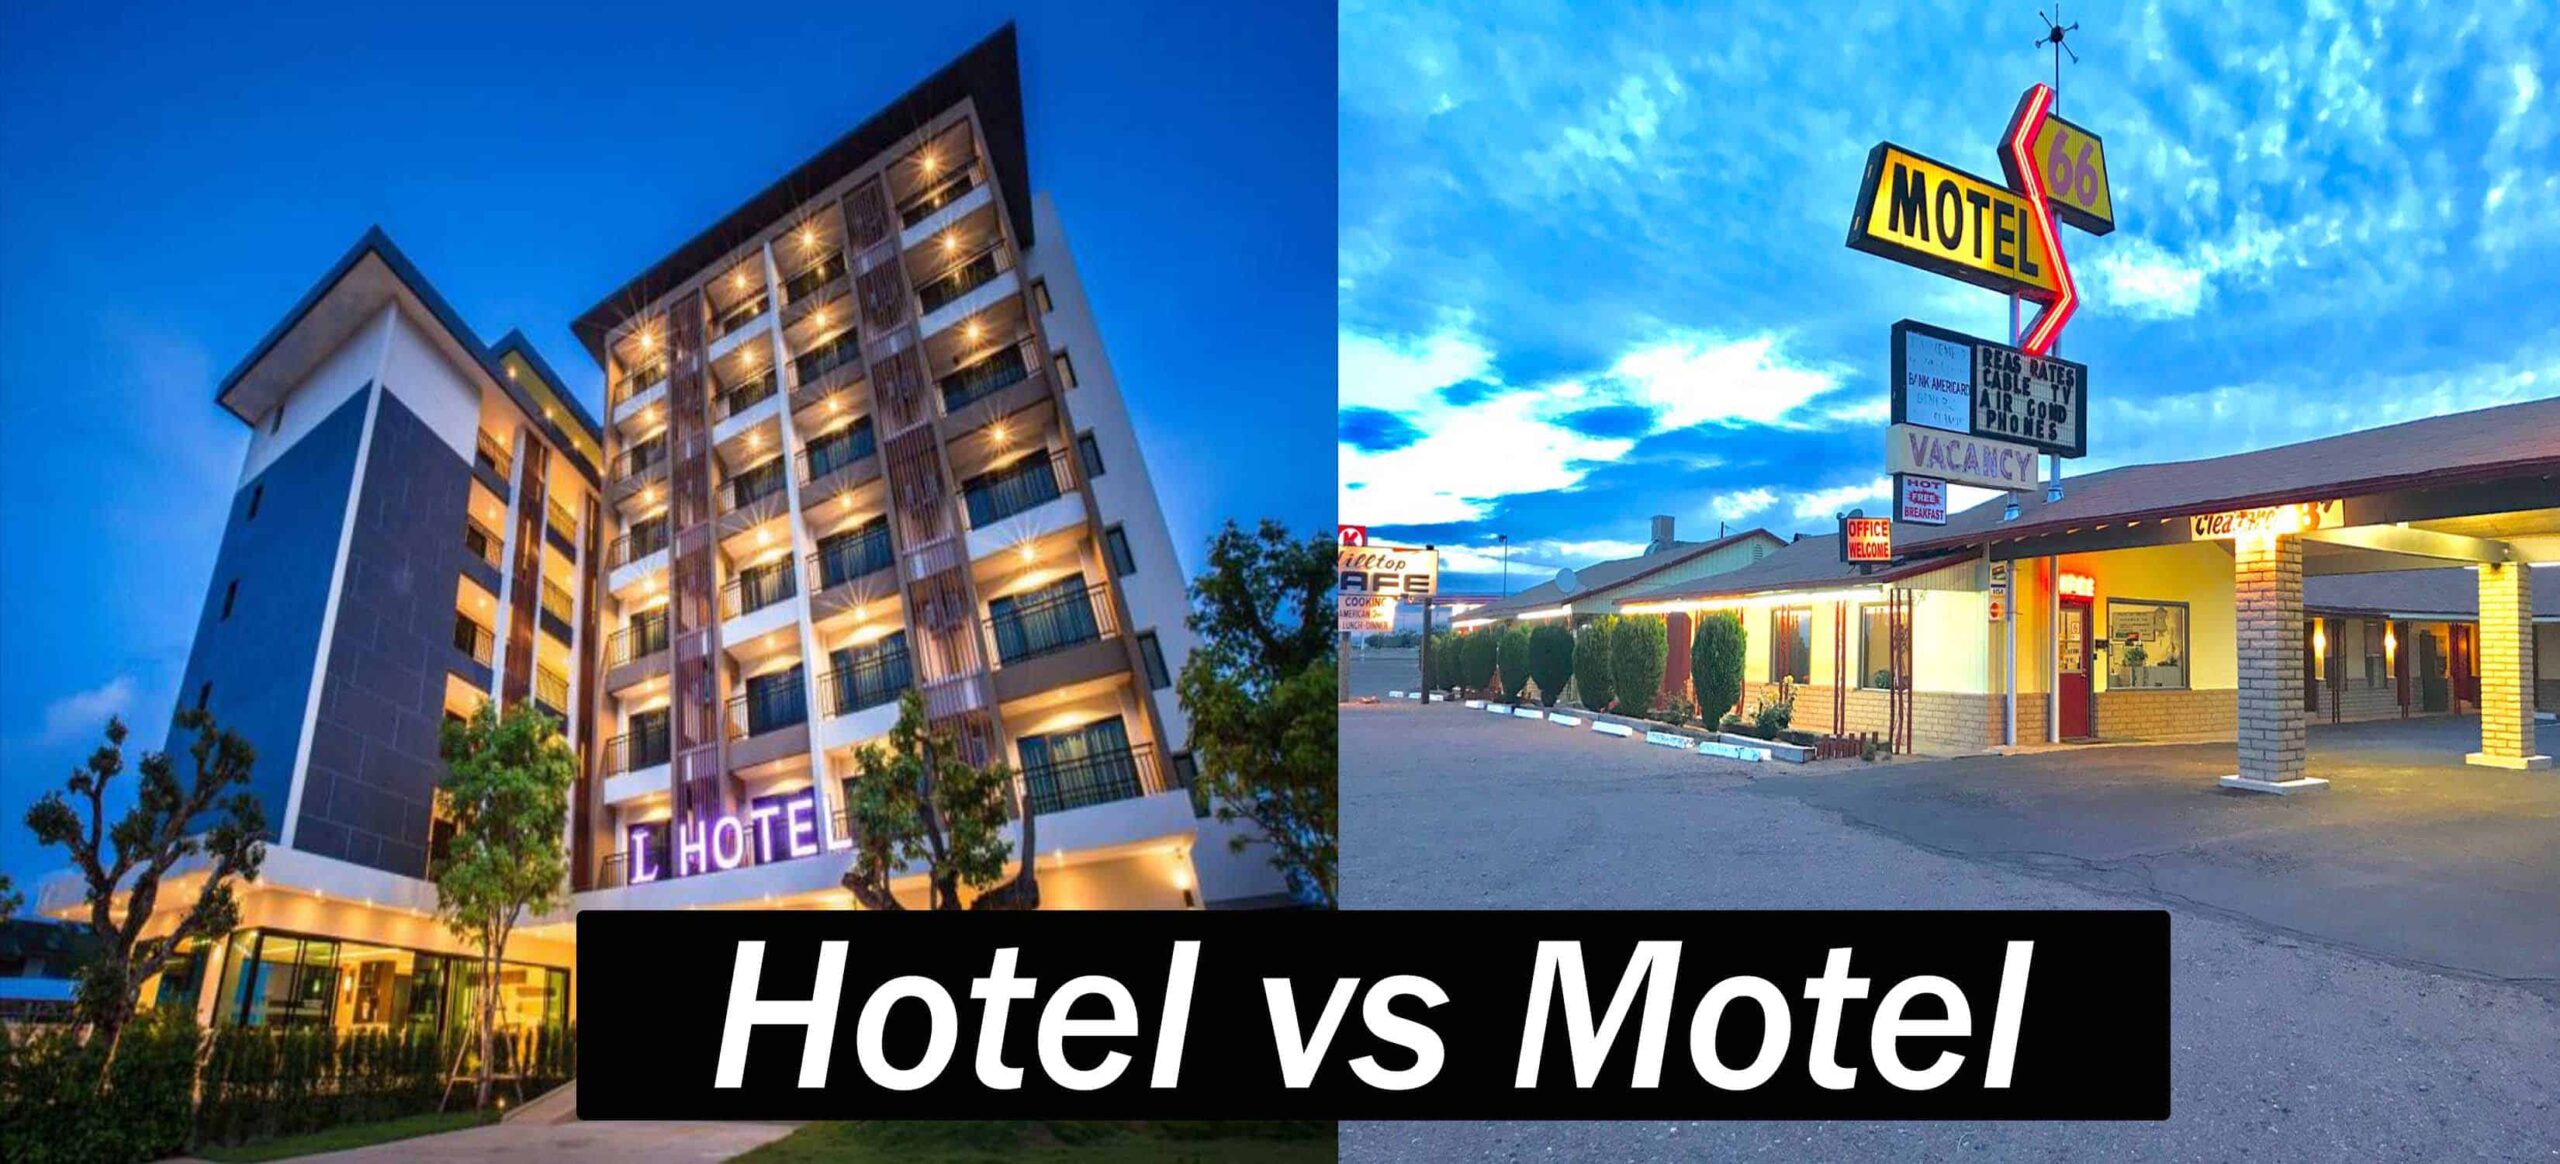 What is The Difference Between Hotel And Motel?